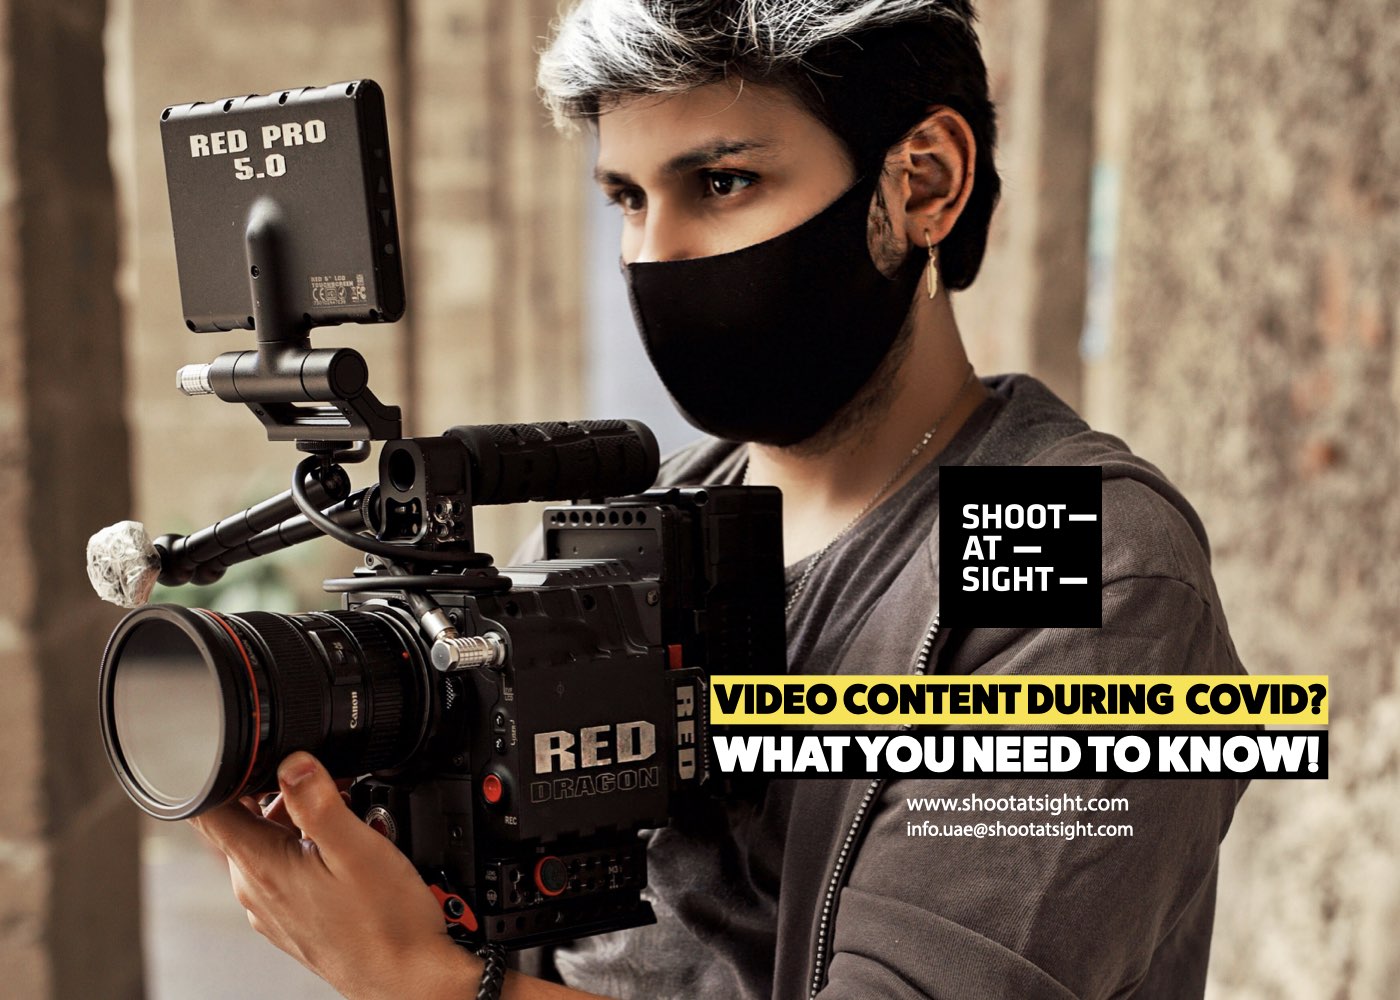 Thinking of Making Video Content During COVID? What You Need to Know!